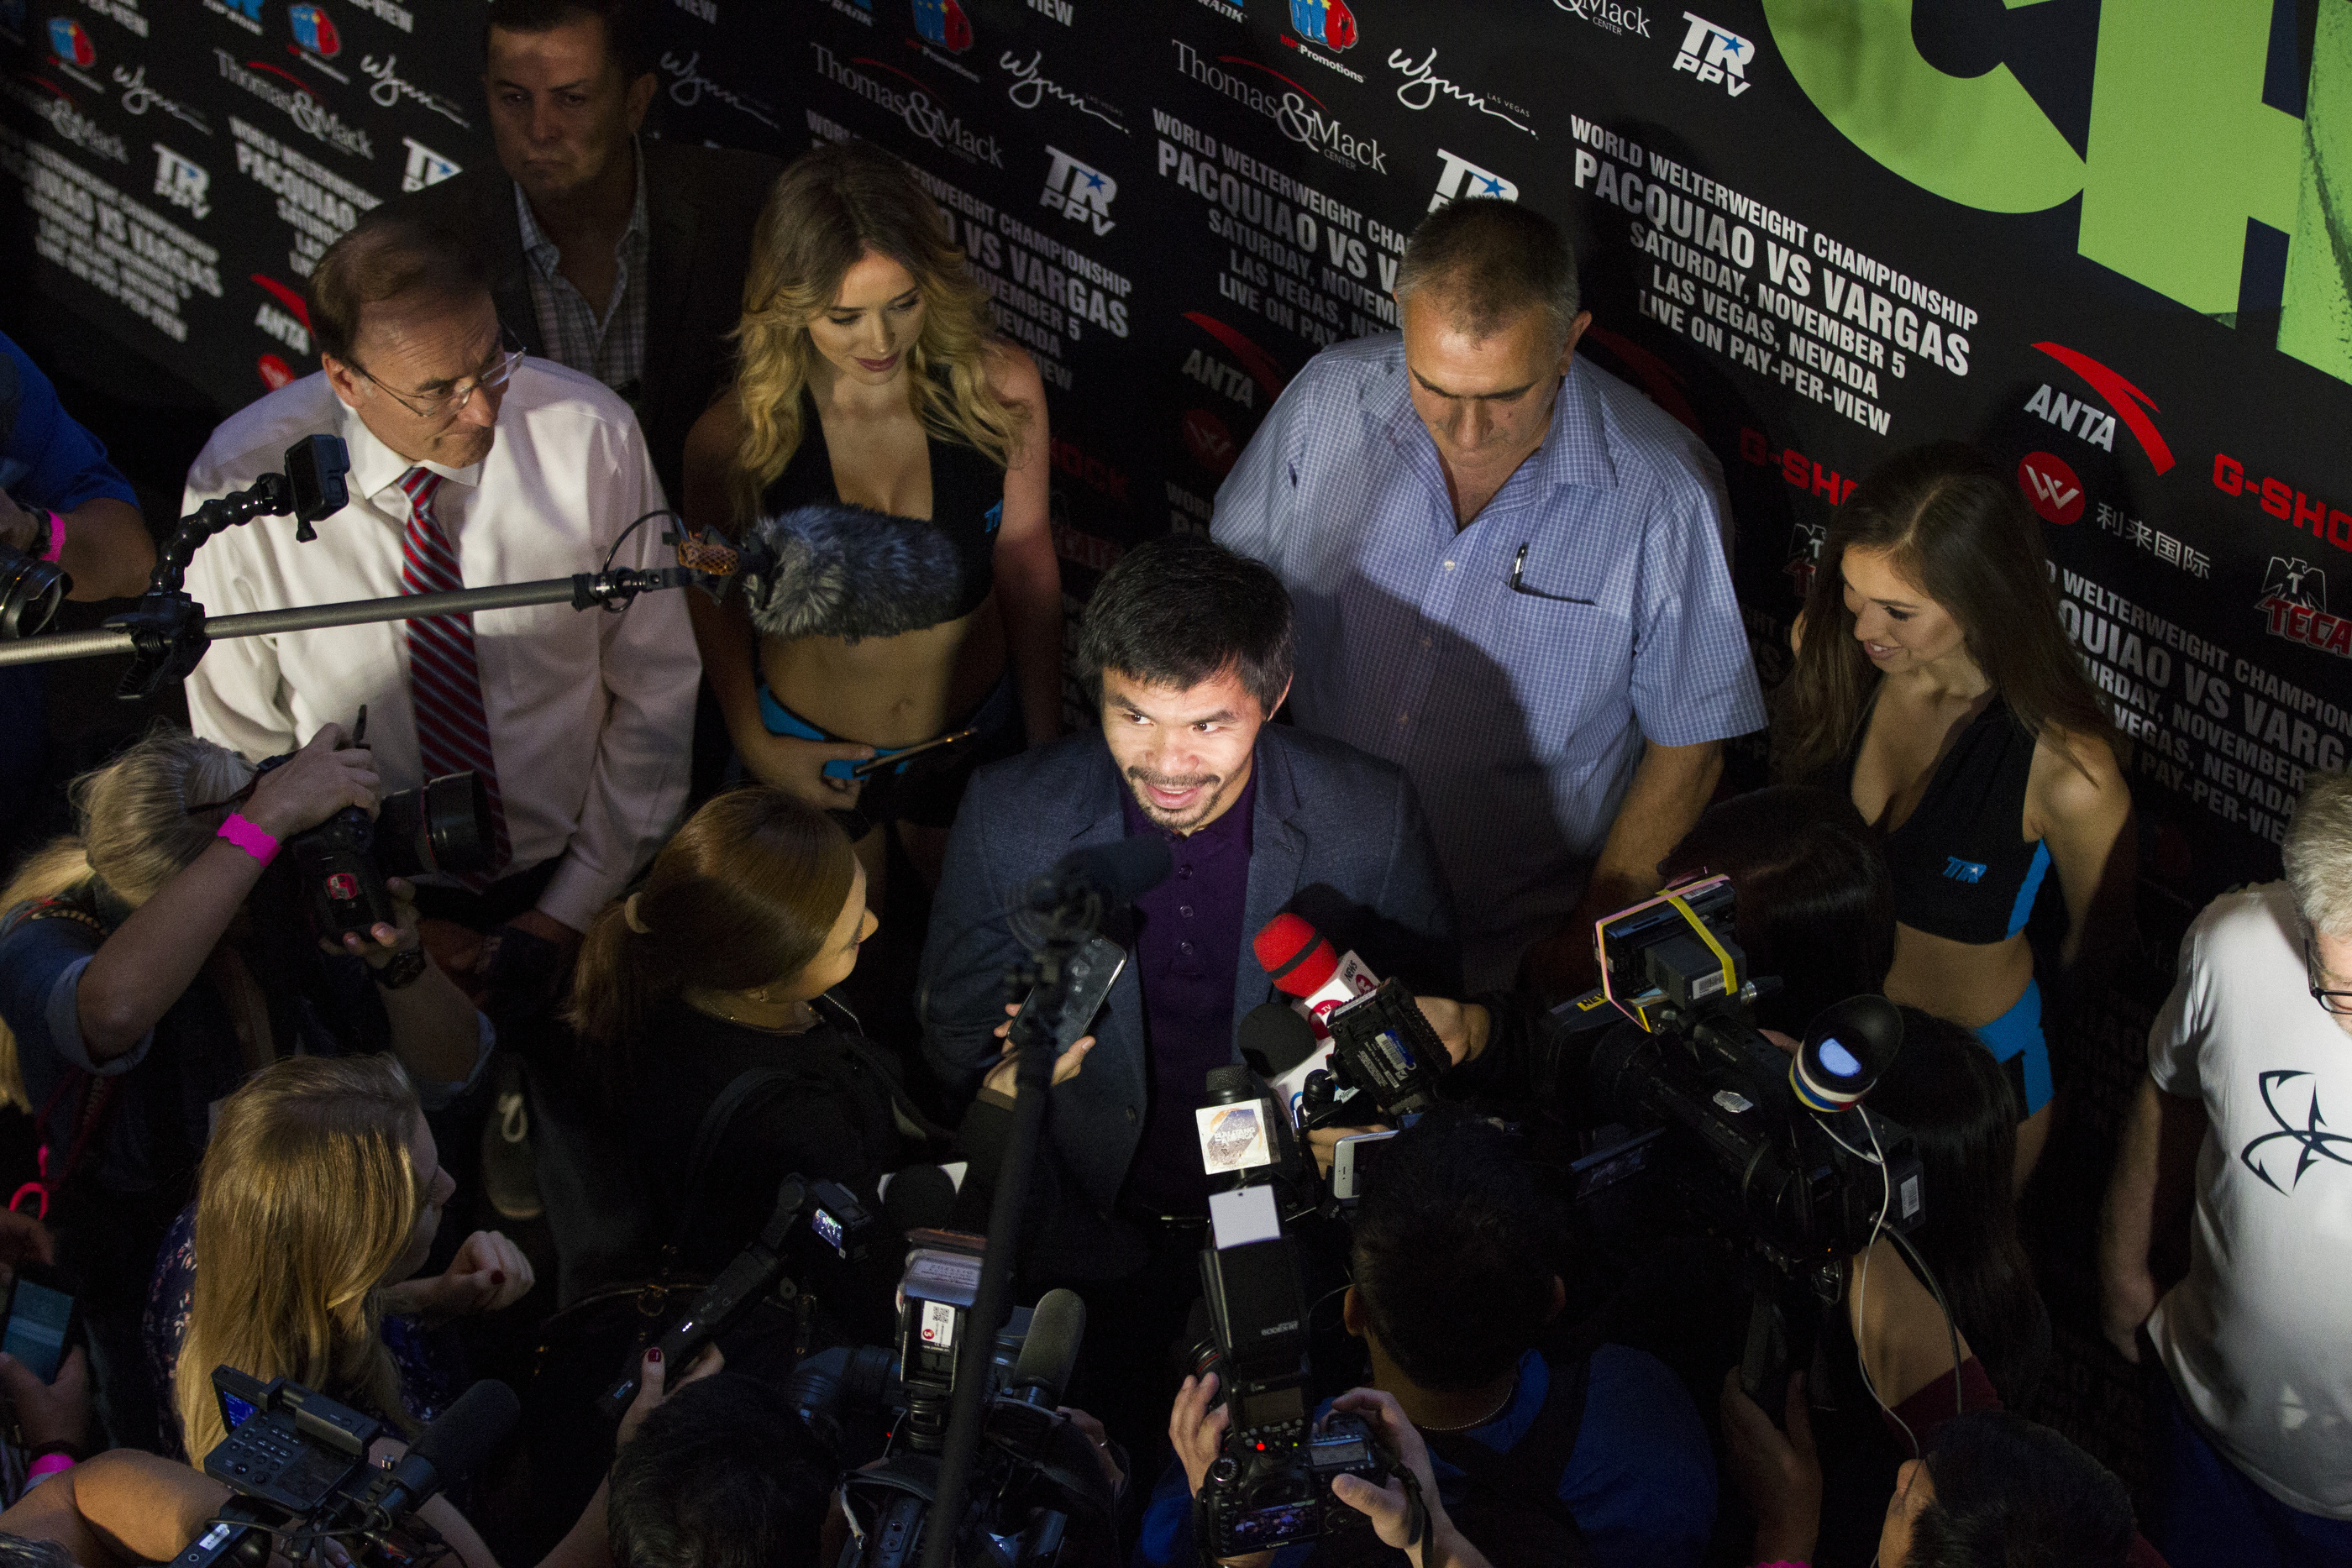 Boxer Manny Pacquiao is interviewed during his "Grand Arrival" to the Wynn hotel-casino on Tuesday, Nov. 1, 2016, in Las Vegas. Pacquiao is scheduled to fight Jessie Vargas on Saturday night at the Thomas & Mack Center. (Erik Verduzco/Las Vegas Review-Journal via AP